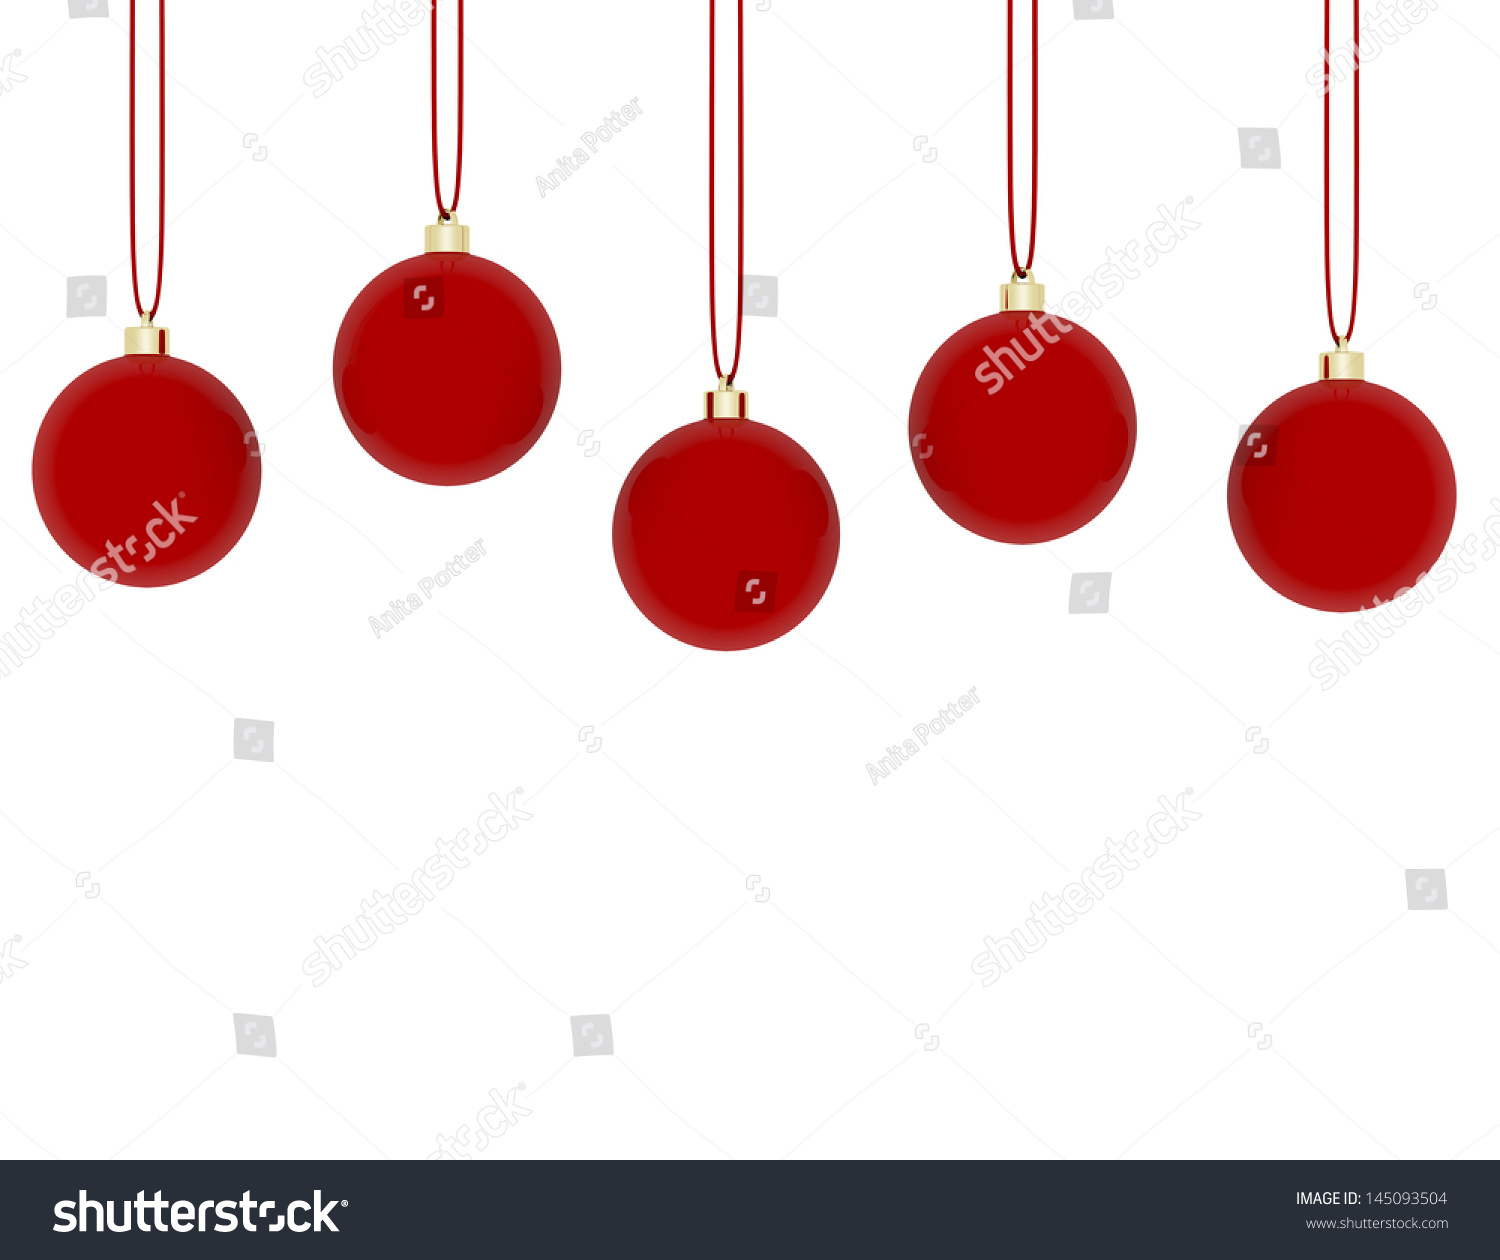 3d Render of Hanging Red Ornaments #145093504